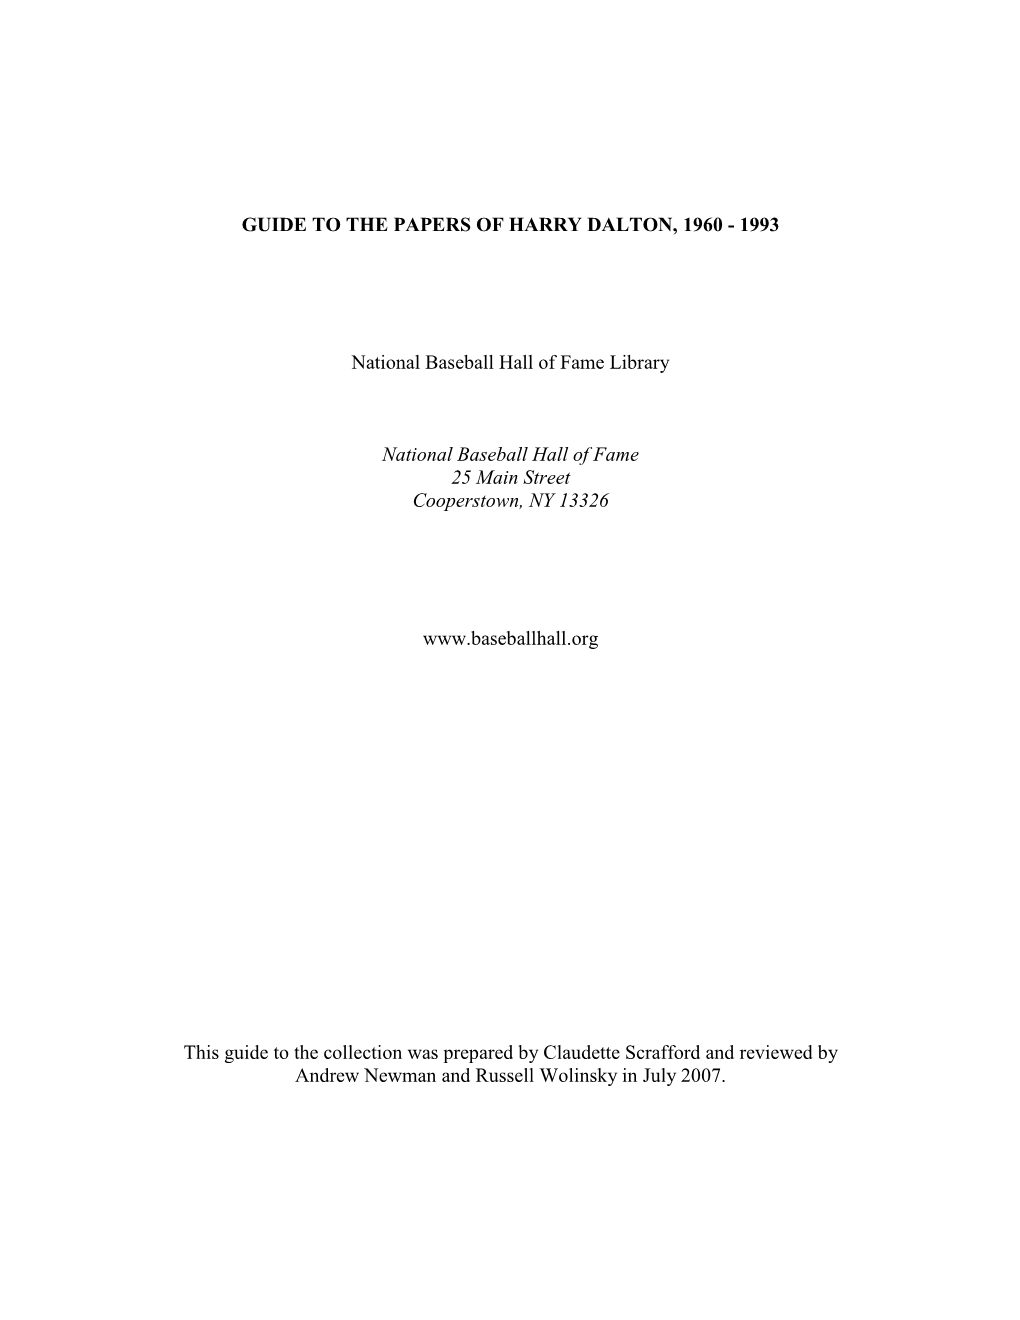 Guide to the Papers of Harry Dalton, 1960 - 1993